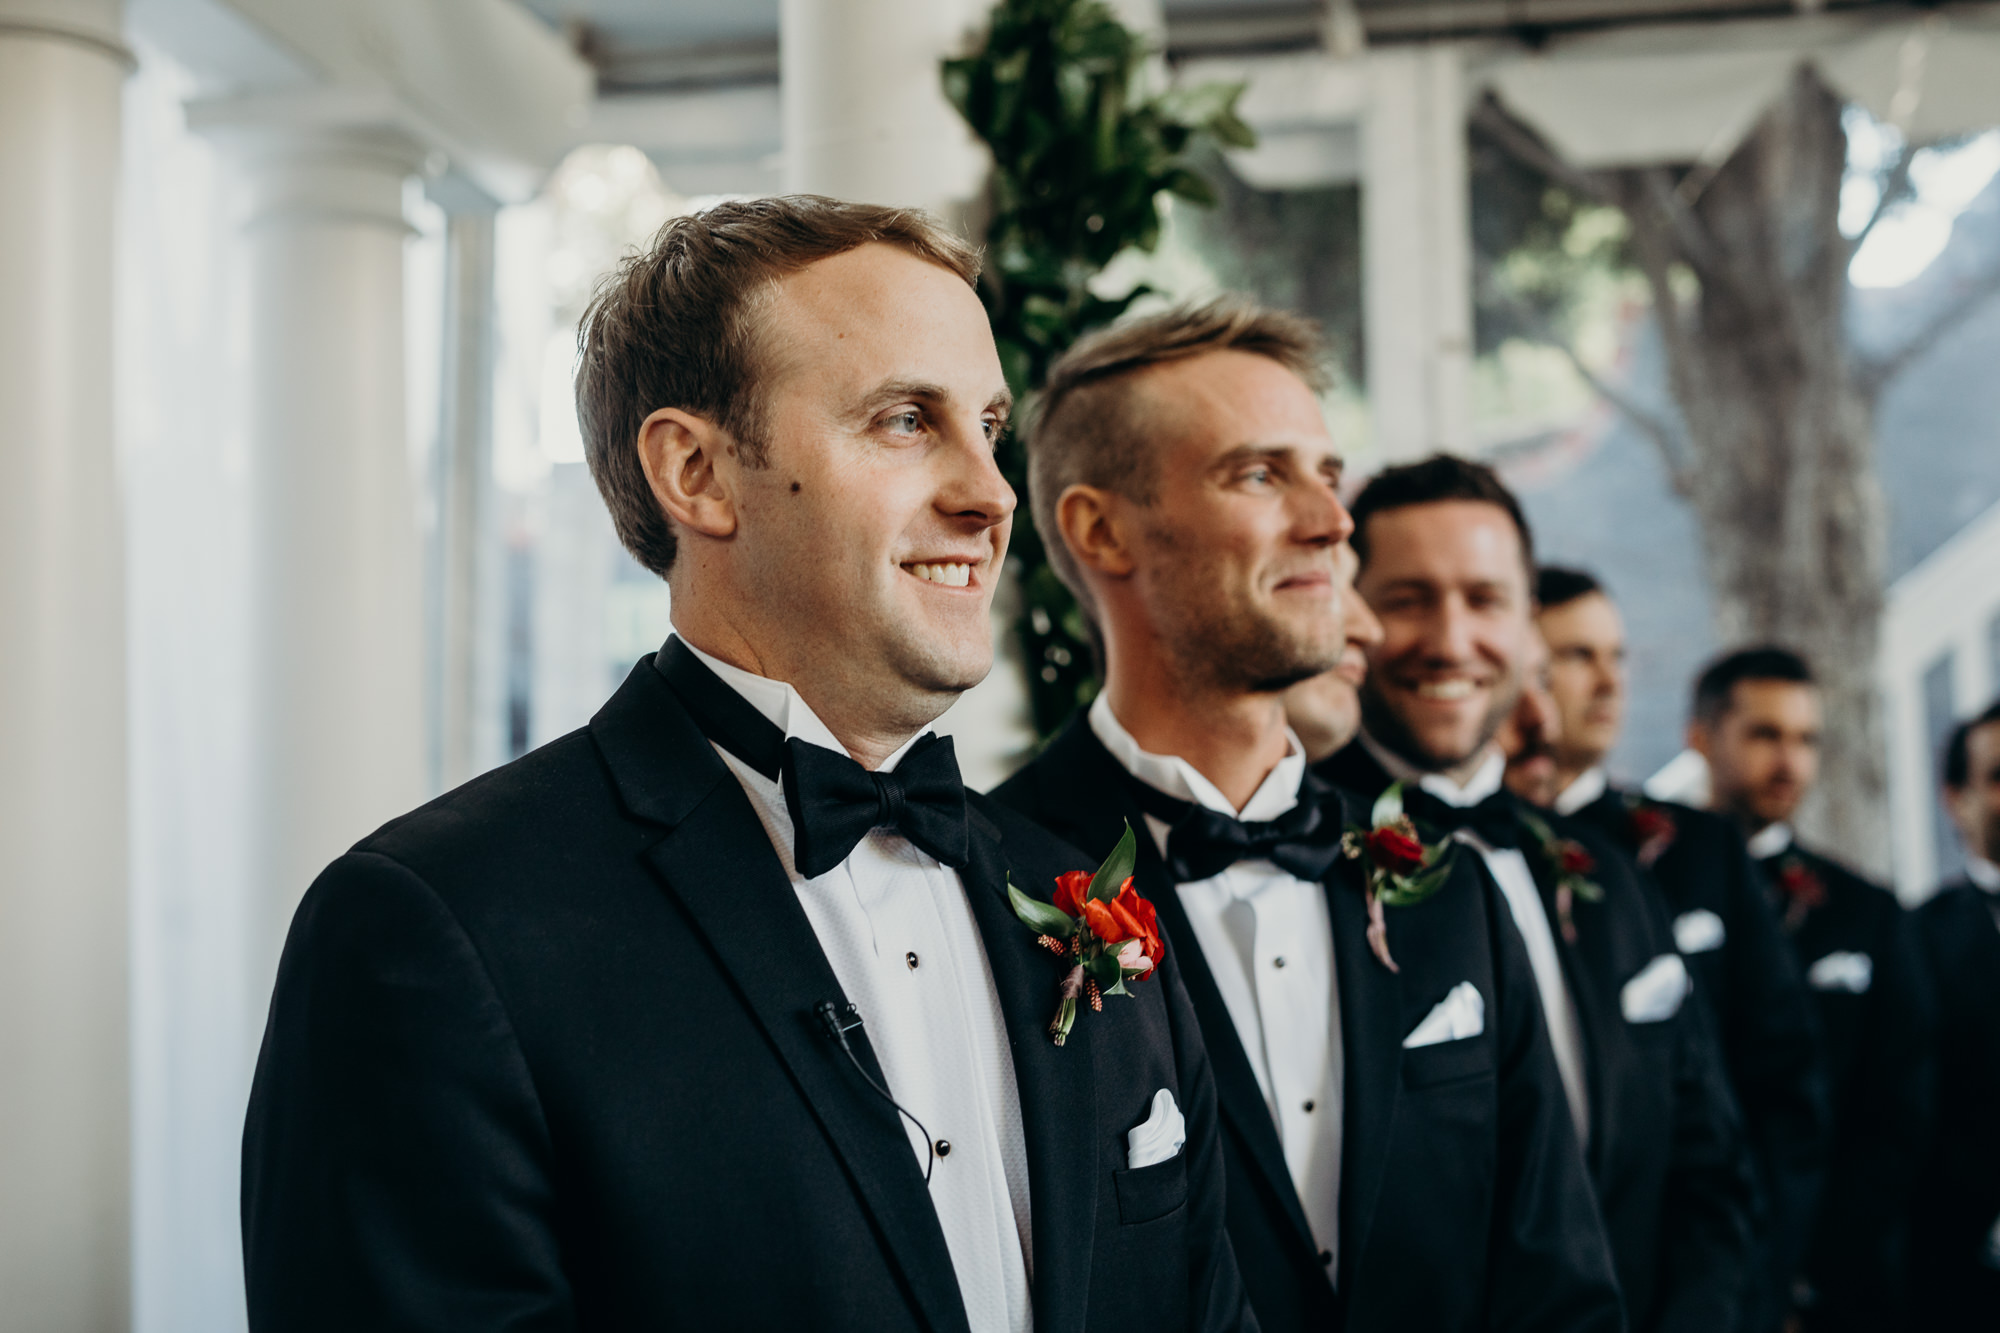 groom during wedding ceremony at five crowns in newport beach, CA